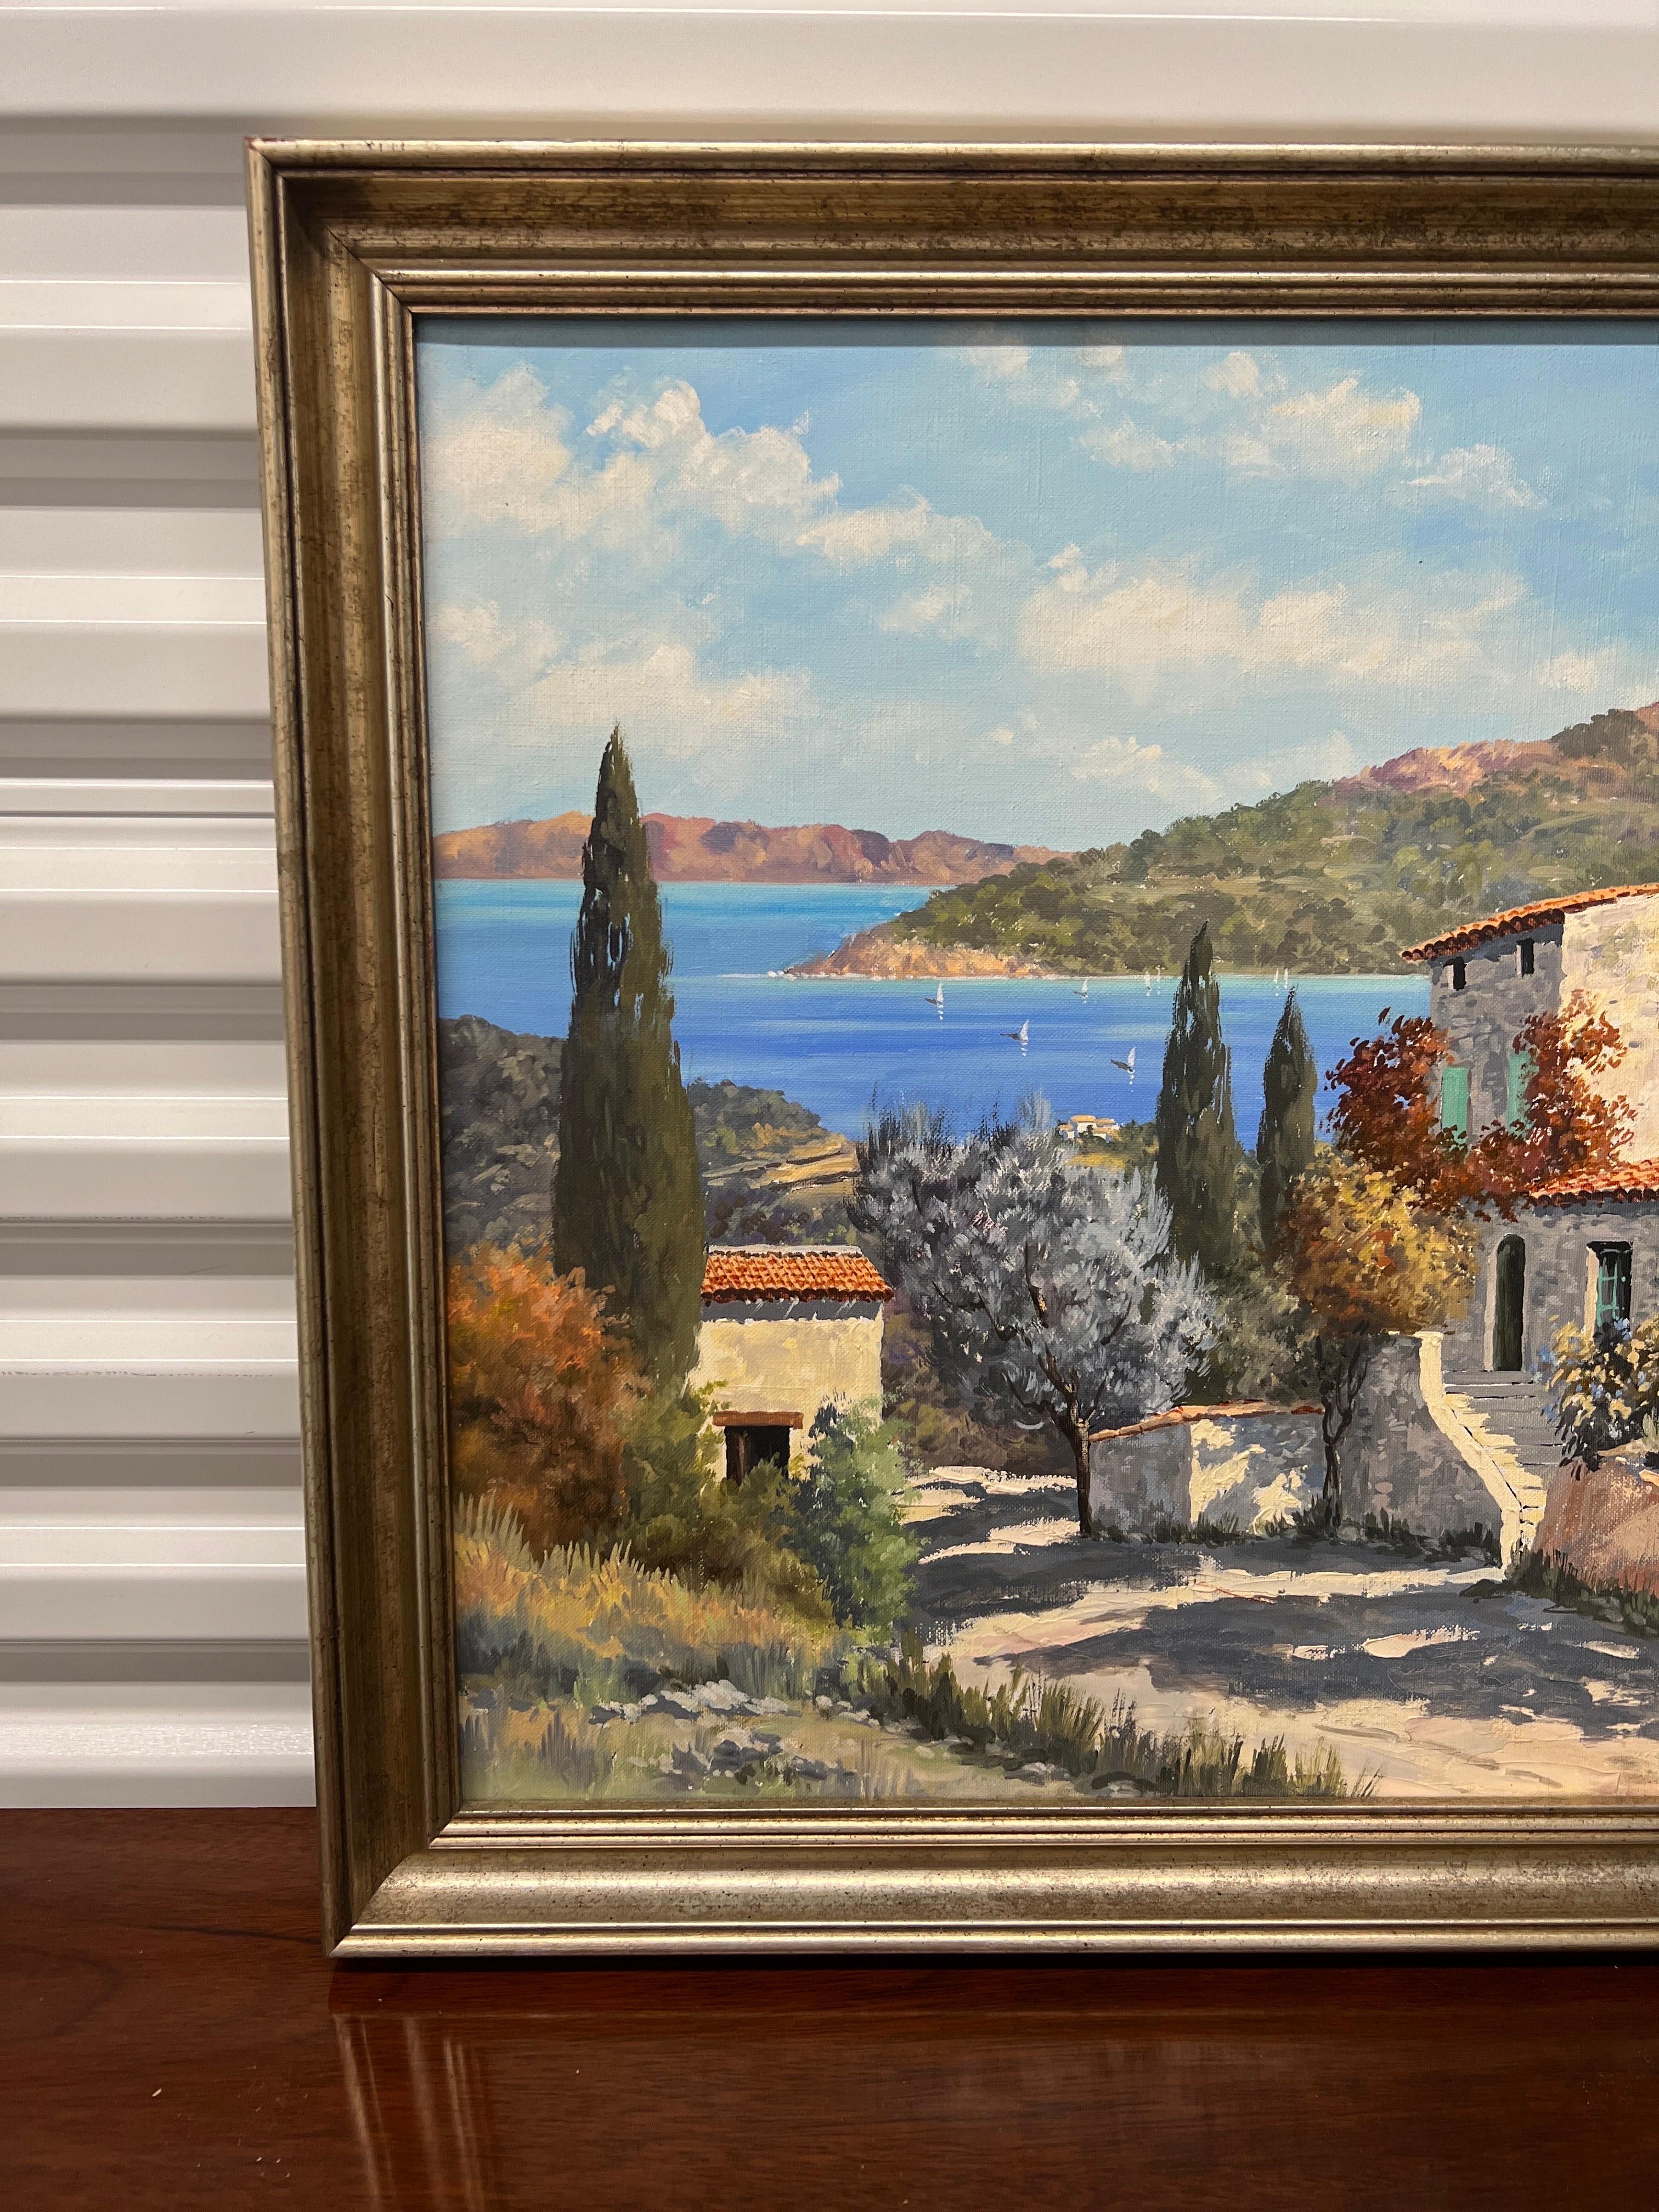 Jean Potronat (French, 1921-1997), circa mid to late 20th century).

Jean Potronat learned from his accomplished father Lucien who was a French painter known for fine quality depictions of picturesque villas in the French Riviera. 

This realist oil